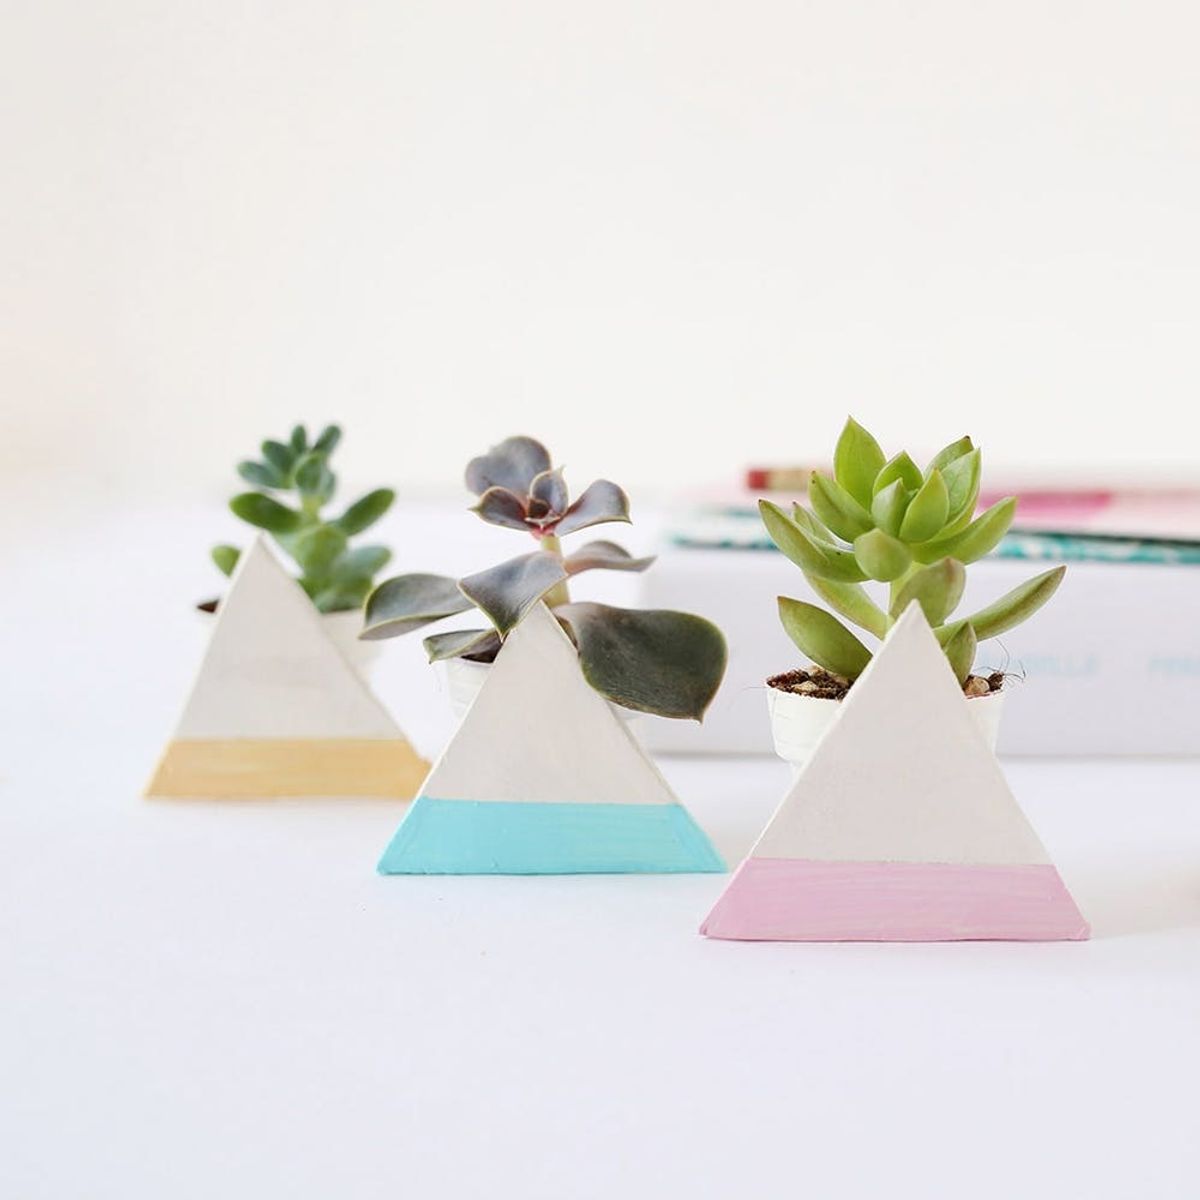 Add Some Spring to Your Space With DIY Geo Planters